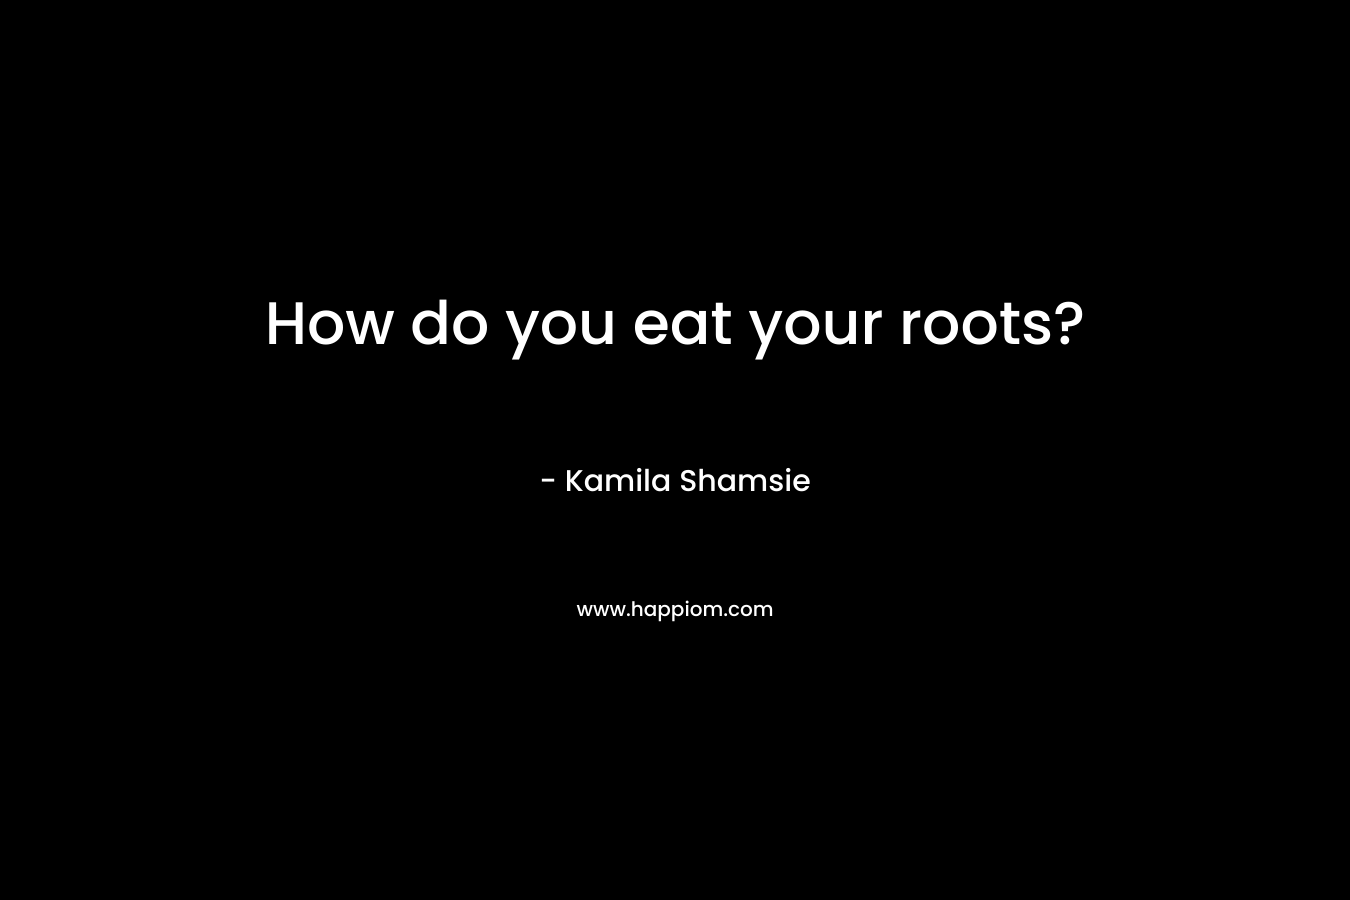 How do you eat your roots?